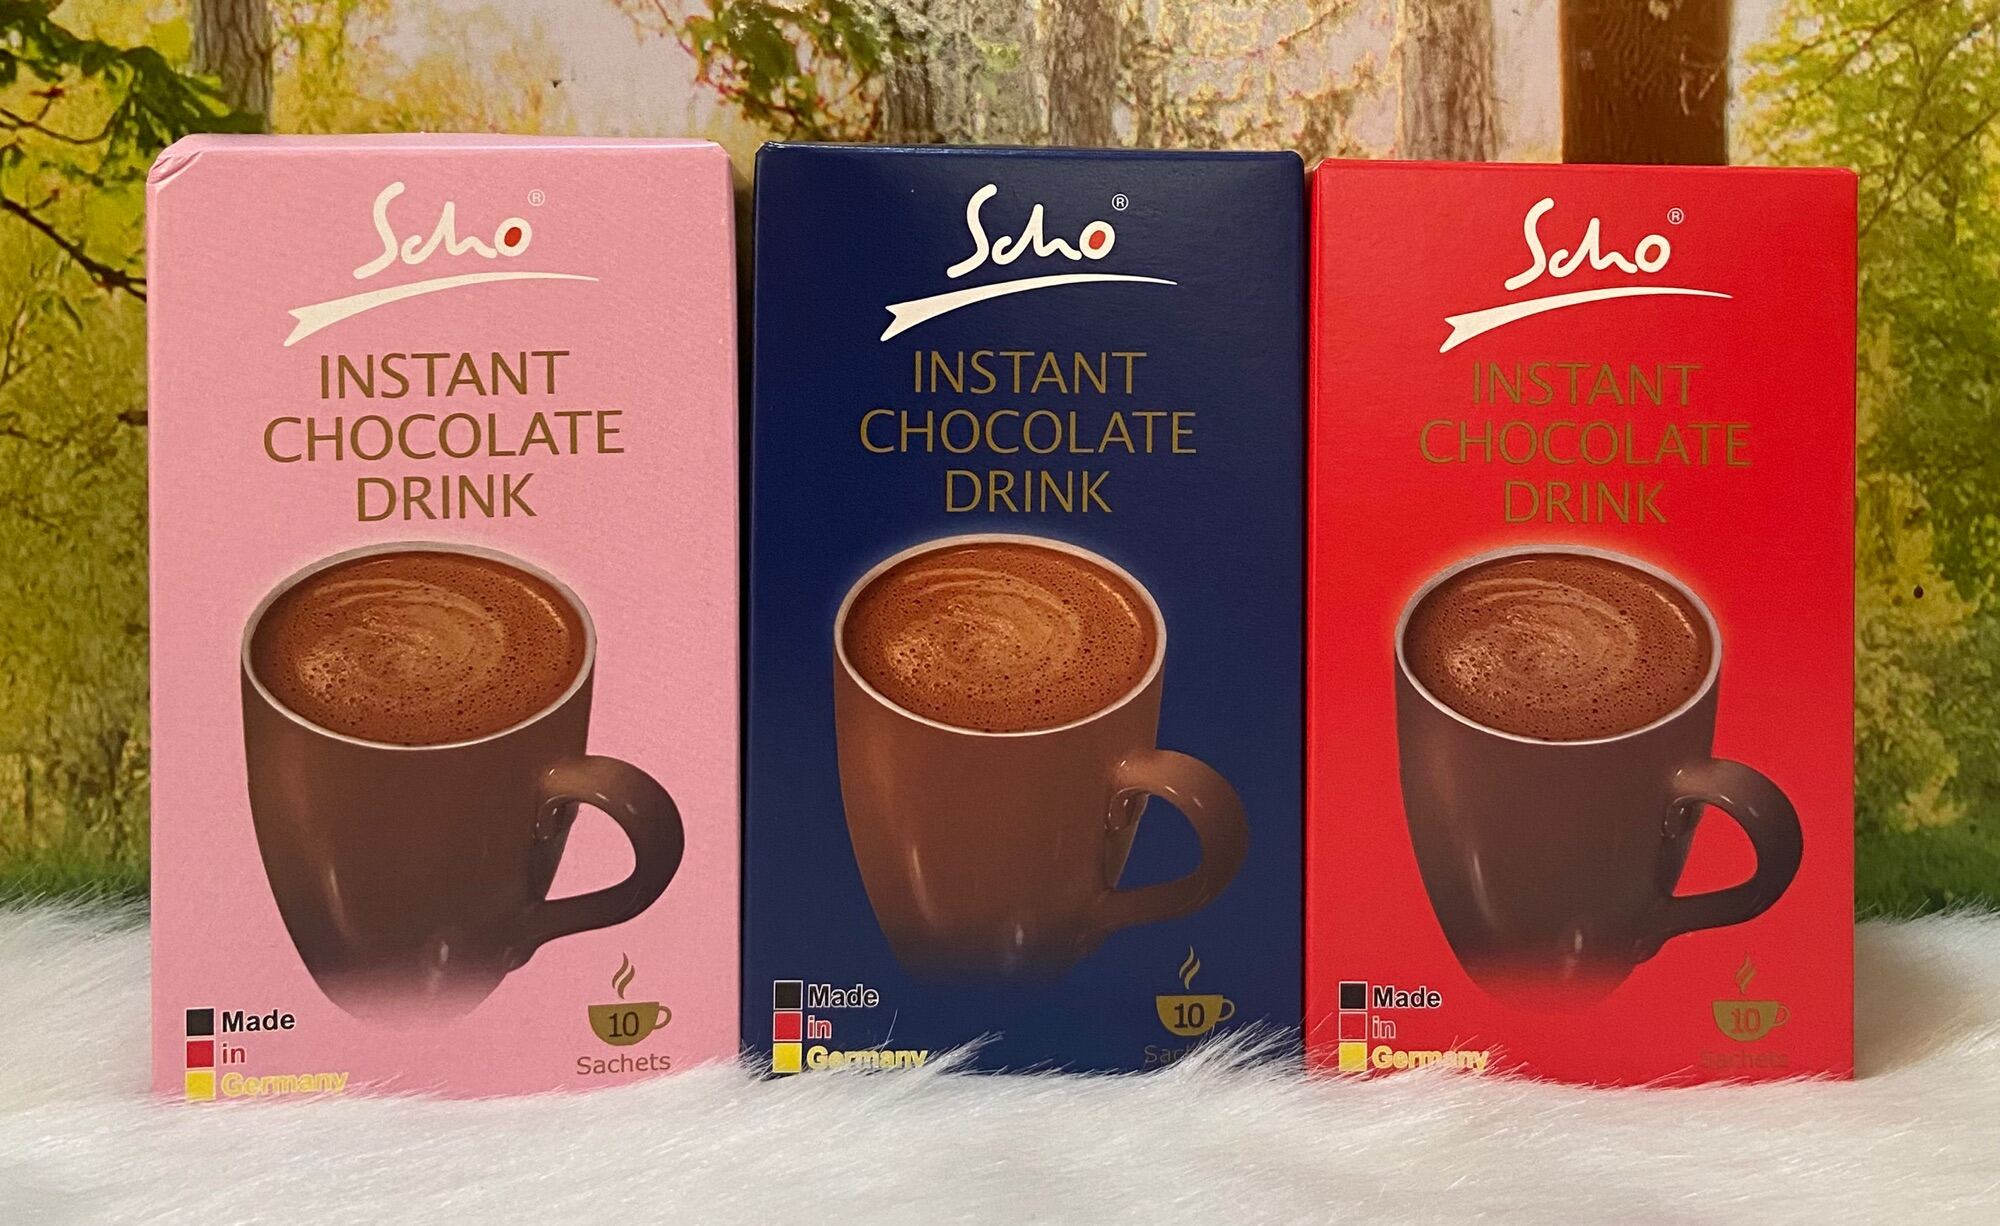 Bột Ca Cao Dinh Dưỡng Soho Instant Chocolate Drink Hộp 200g